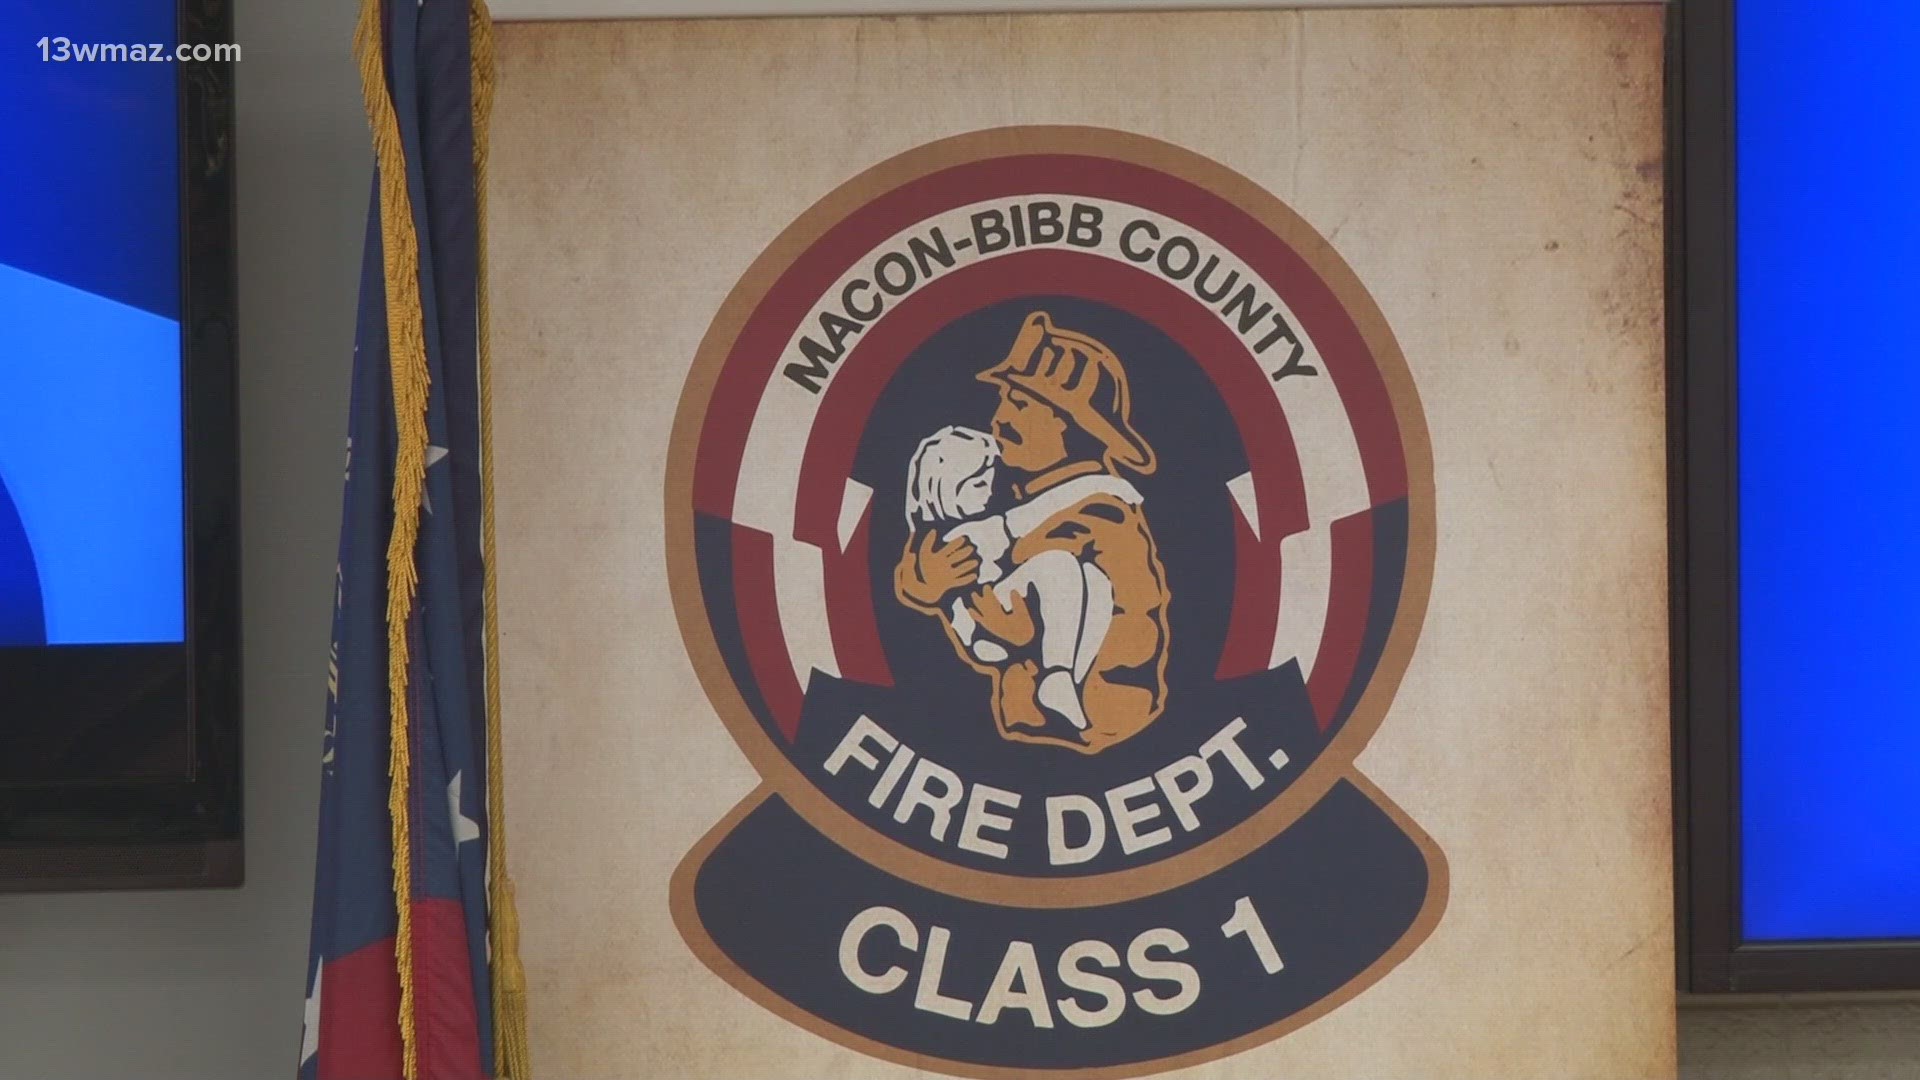 First responder jobs are hard to fill right now, and the Macon-Bibb County Fire Department is hoping this program will change that.